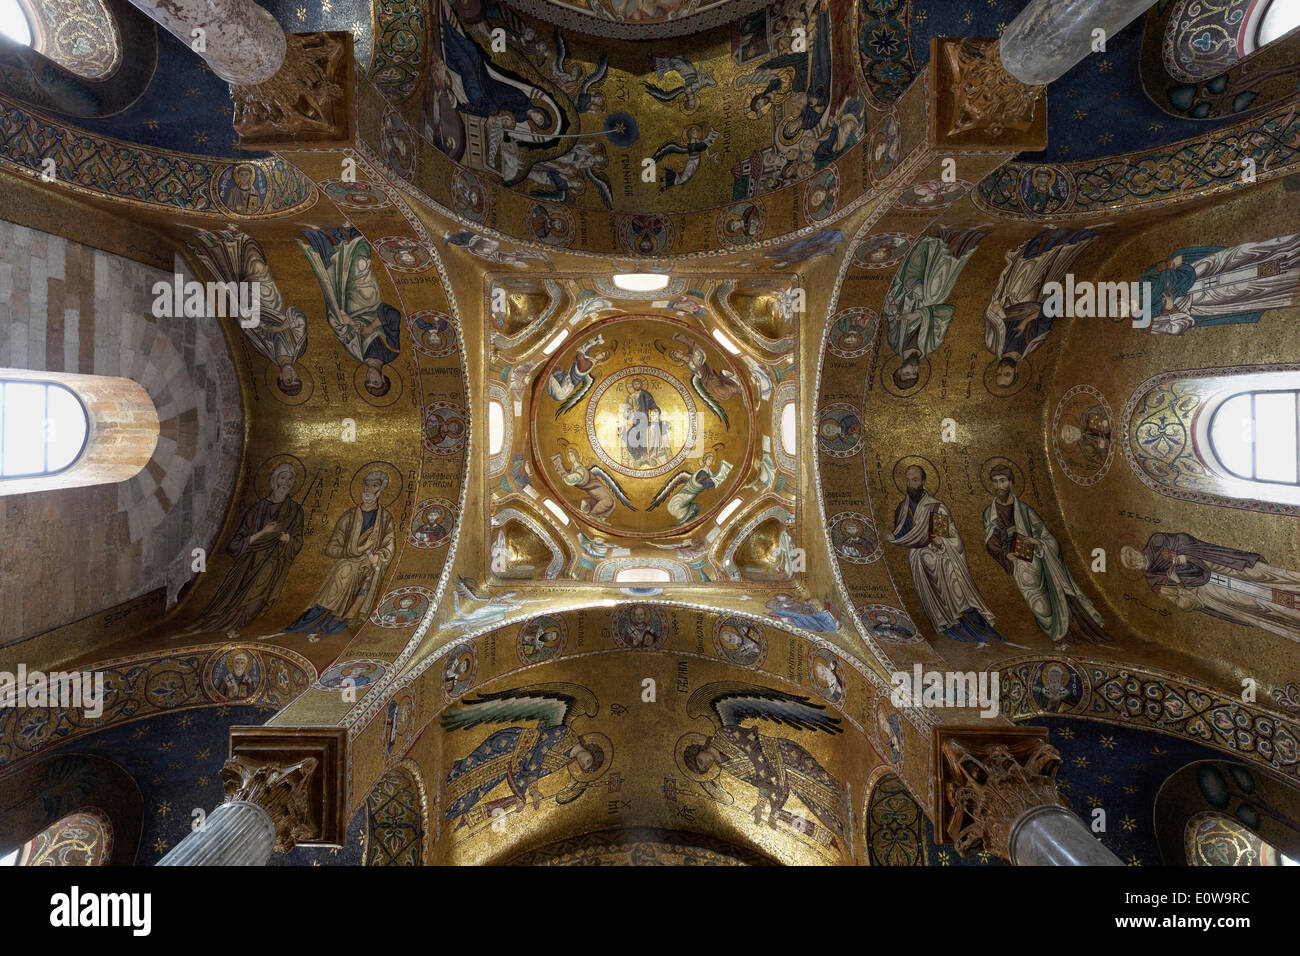 Dome with Byzantine mosaics, Christ Pantocrator, archangels and prophets, La Martorana Church from the Norman period, Palermo Stock Photo